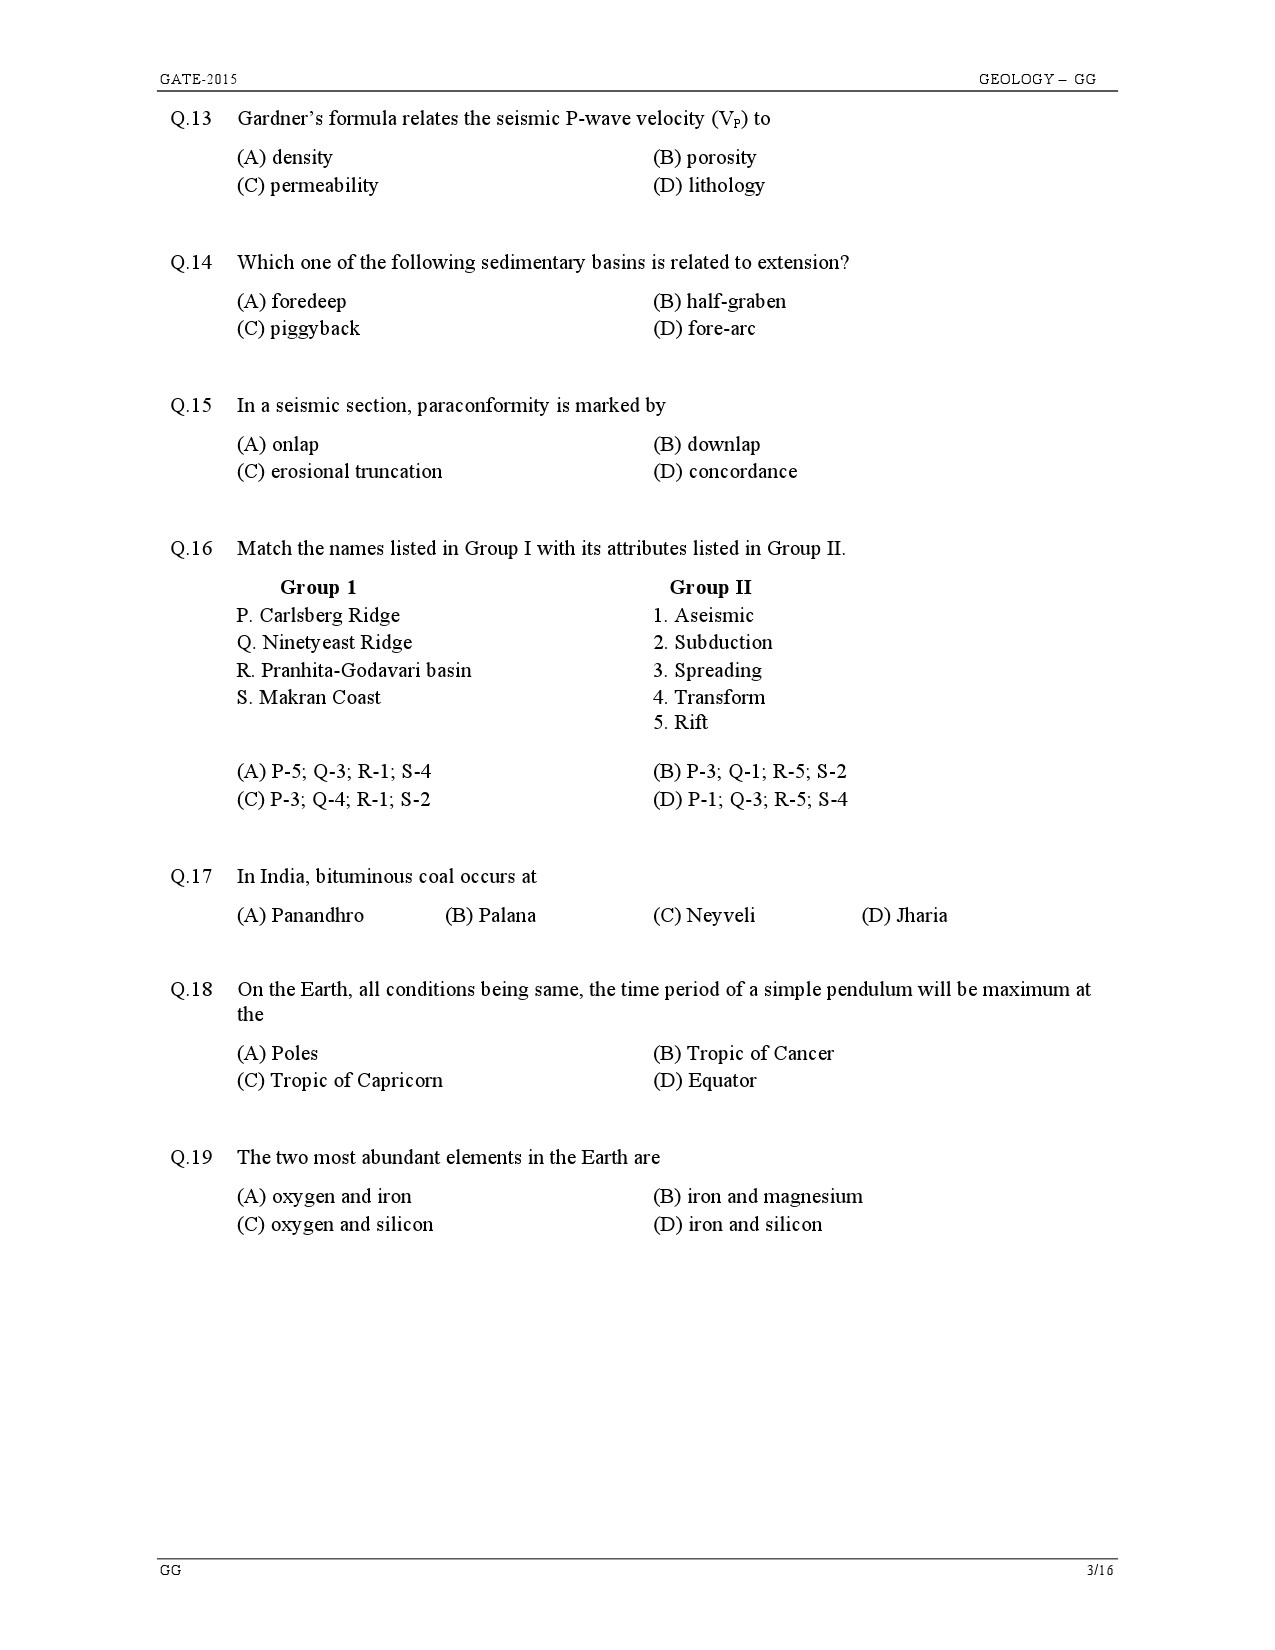 GATE Exam Question Paper 2015 Geology and Geophysics 3